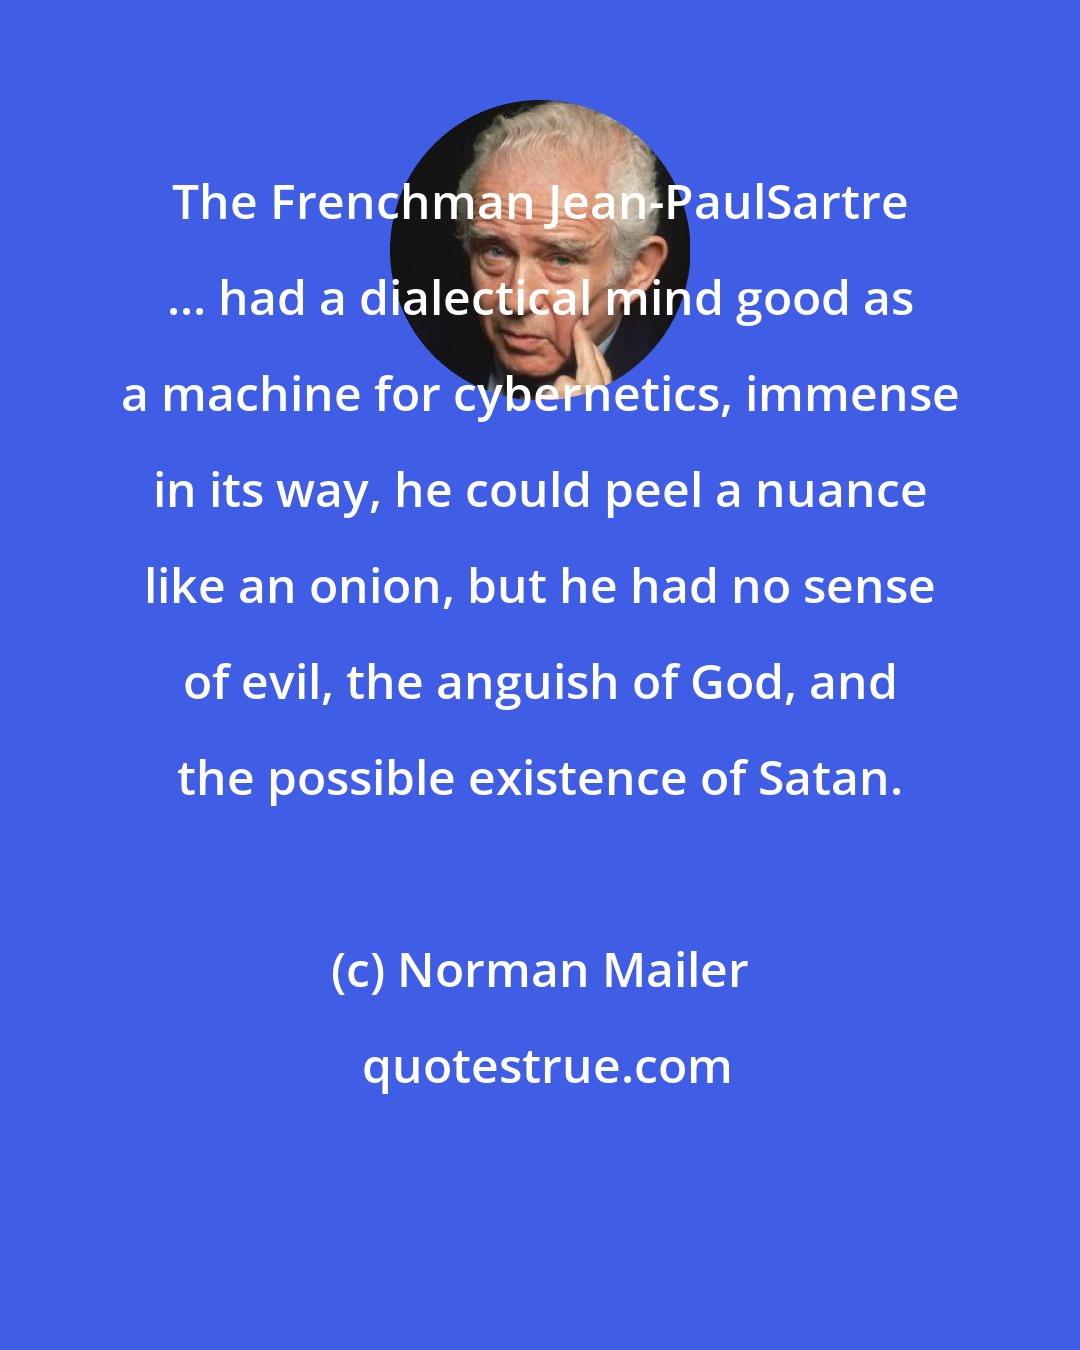 Norman Mailer: The Frenchman Jean-PaulSartre ... had a dialectical mind good as a machine for cybernetics, immense in its way, he could peel a nuance like an onion, but he had no sense of evil, the anguish of God, and the possible existence of Satan.